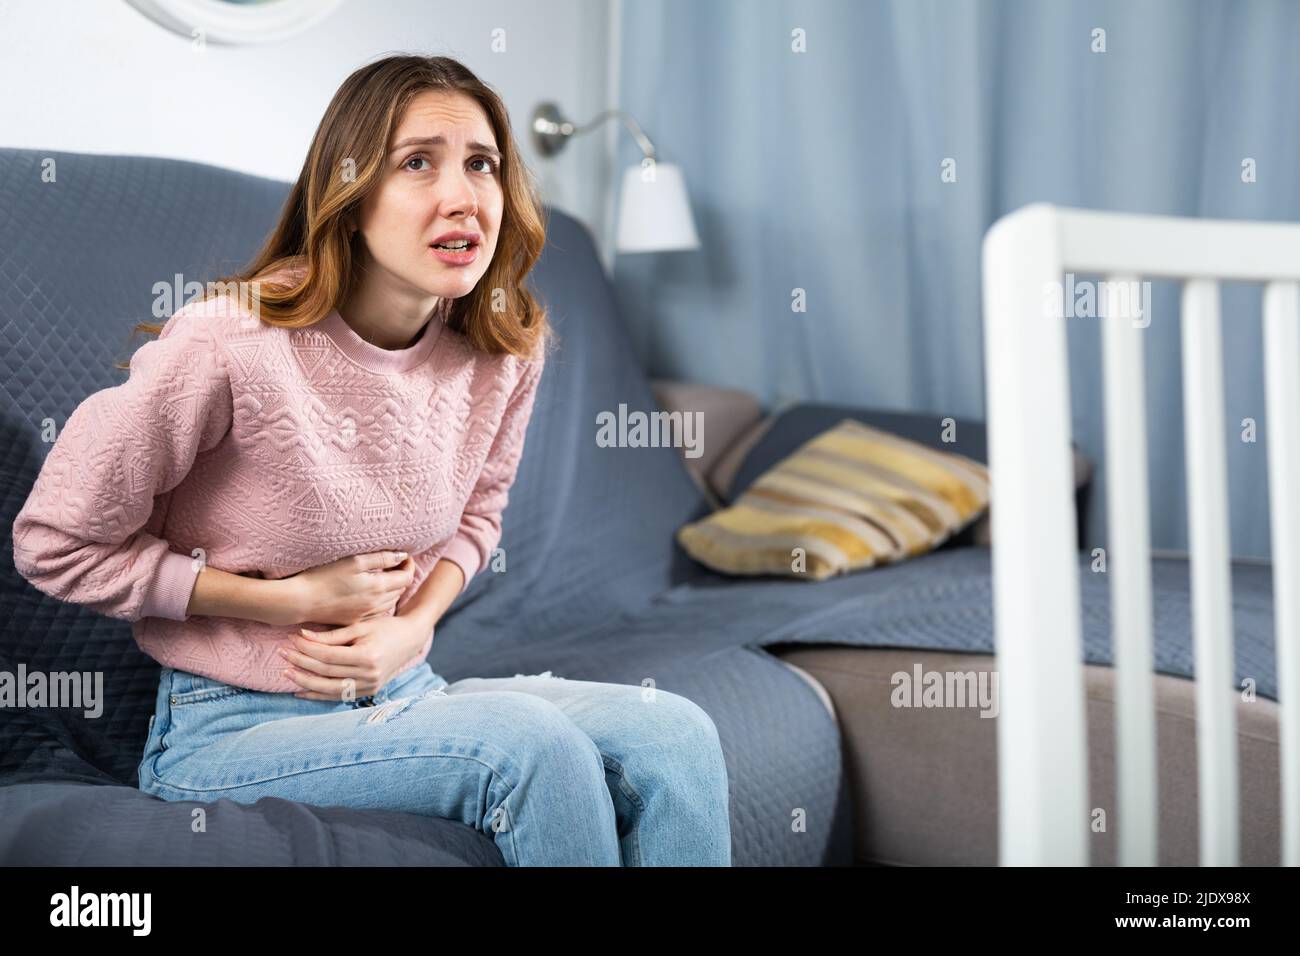 Young woman suffering from abdominal pain Stock Photo